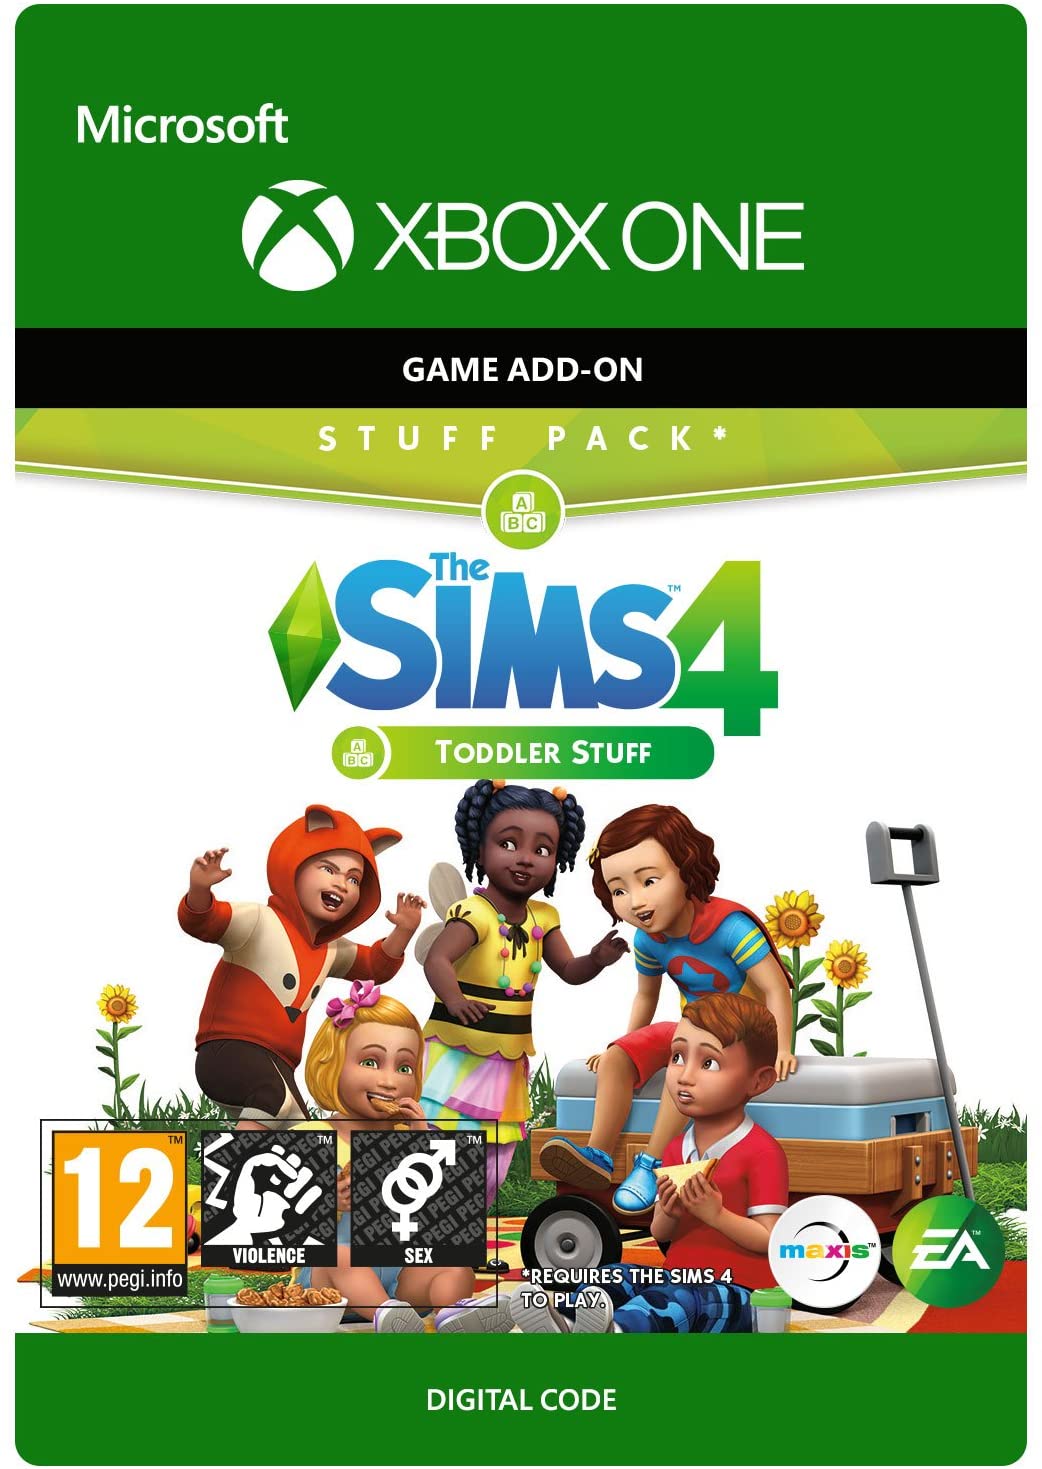 The Sims 4: Toddler Stuff Digital Download Key (Xbox One): Europe